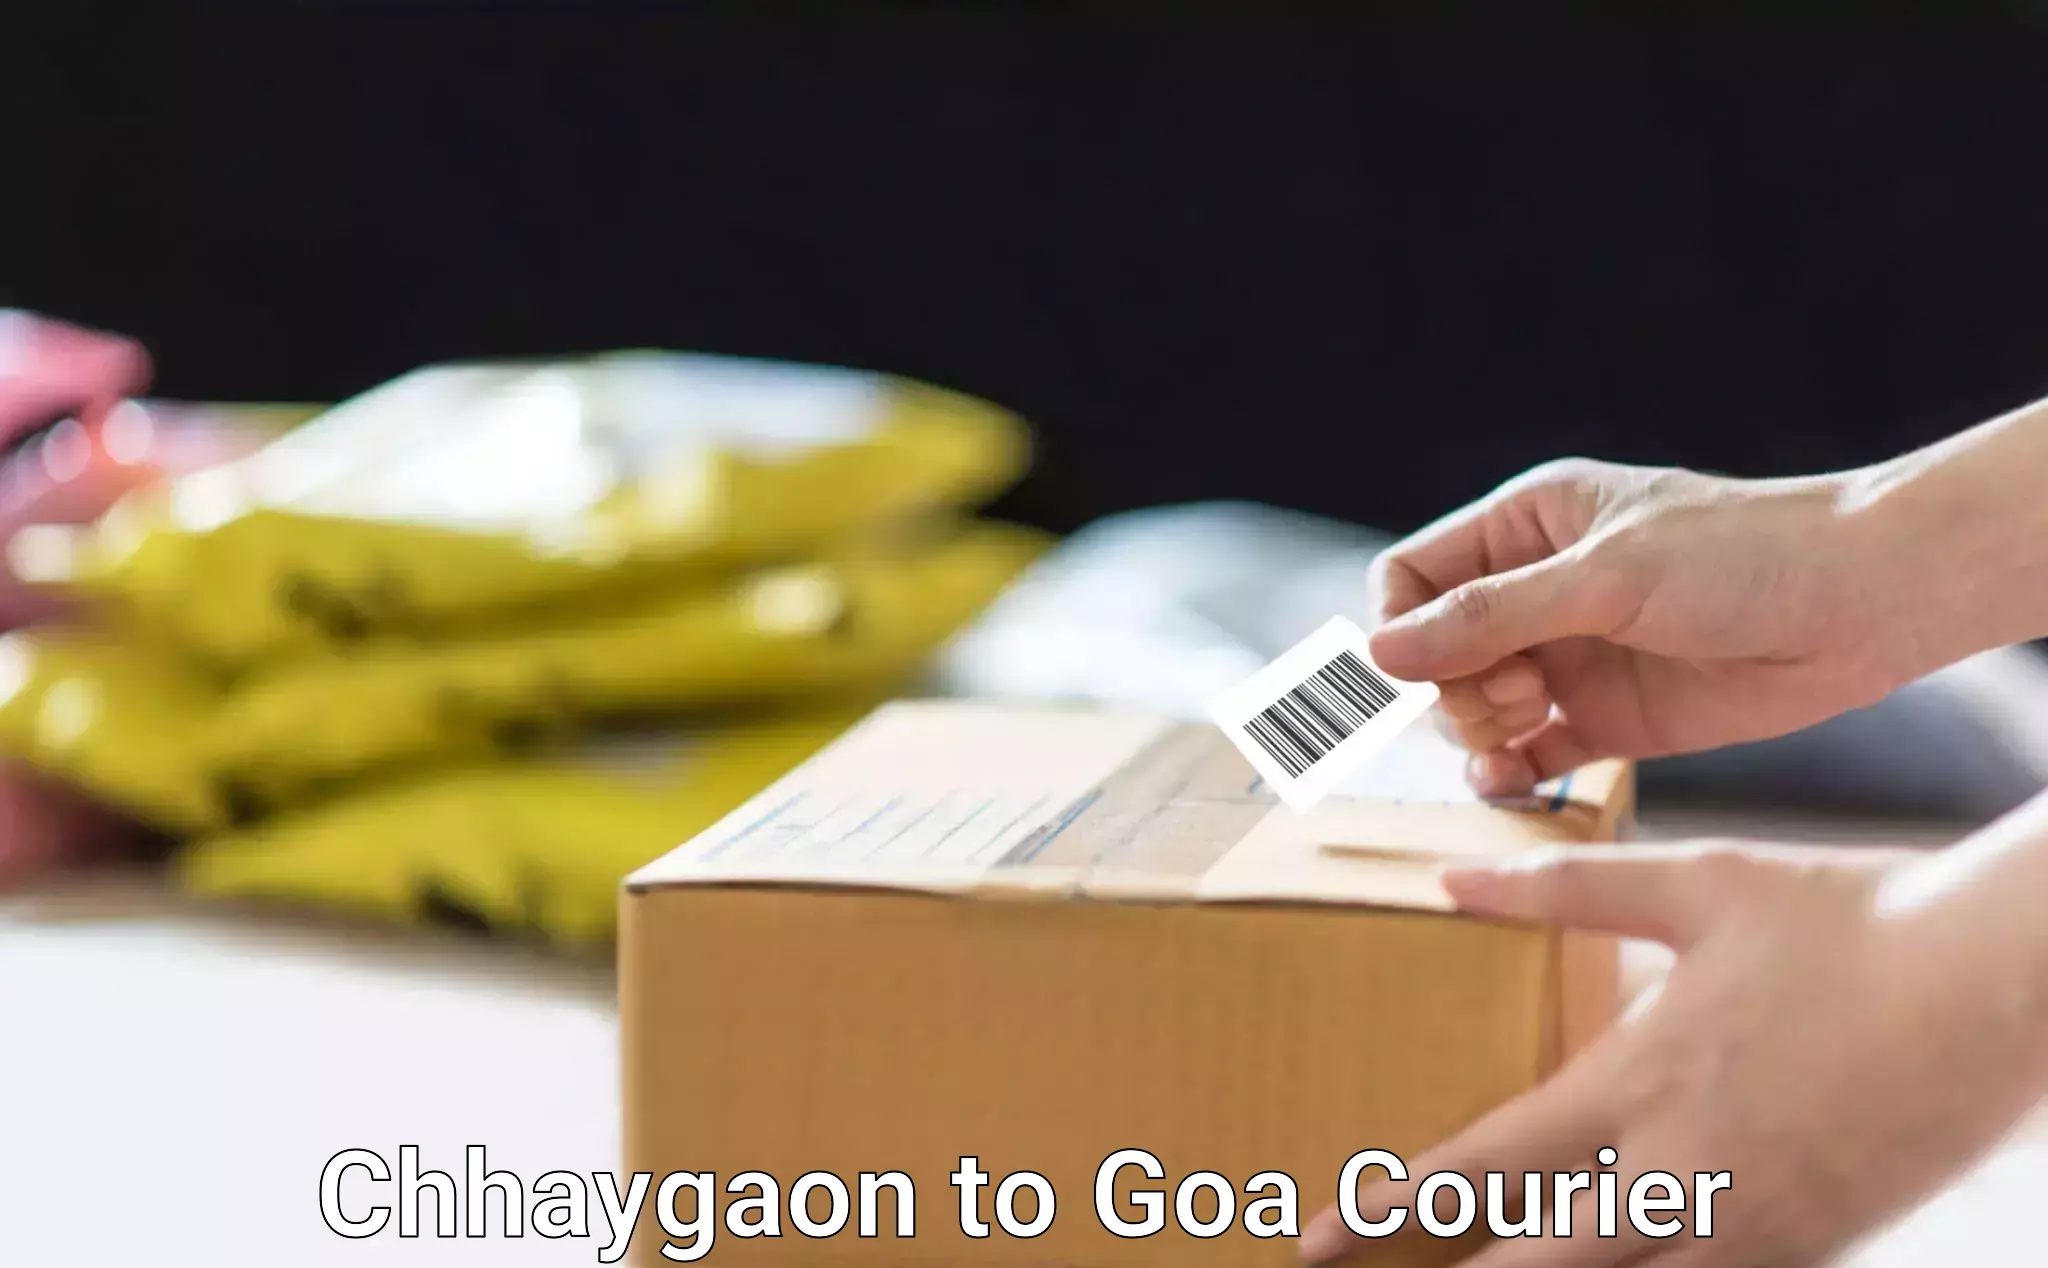 Personal courier services Chhaygaon to Panaji